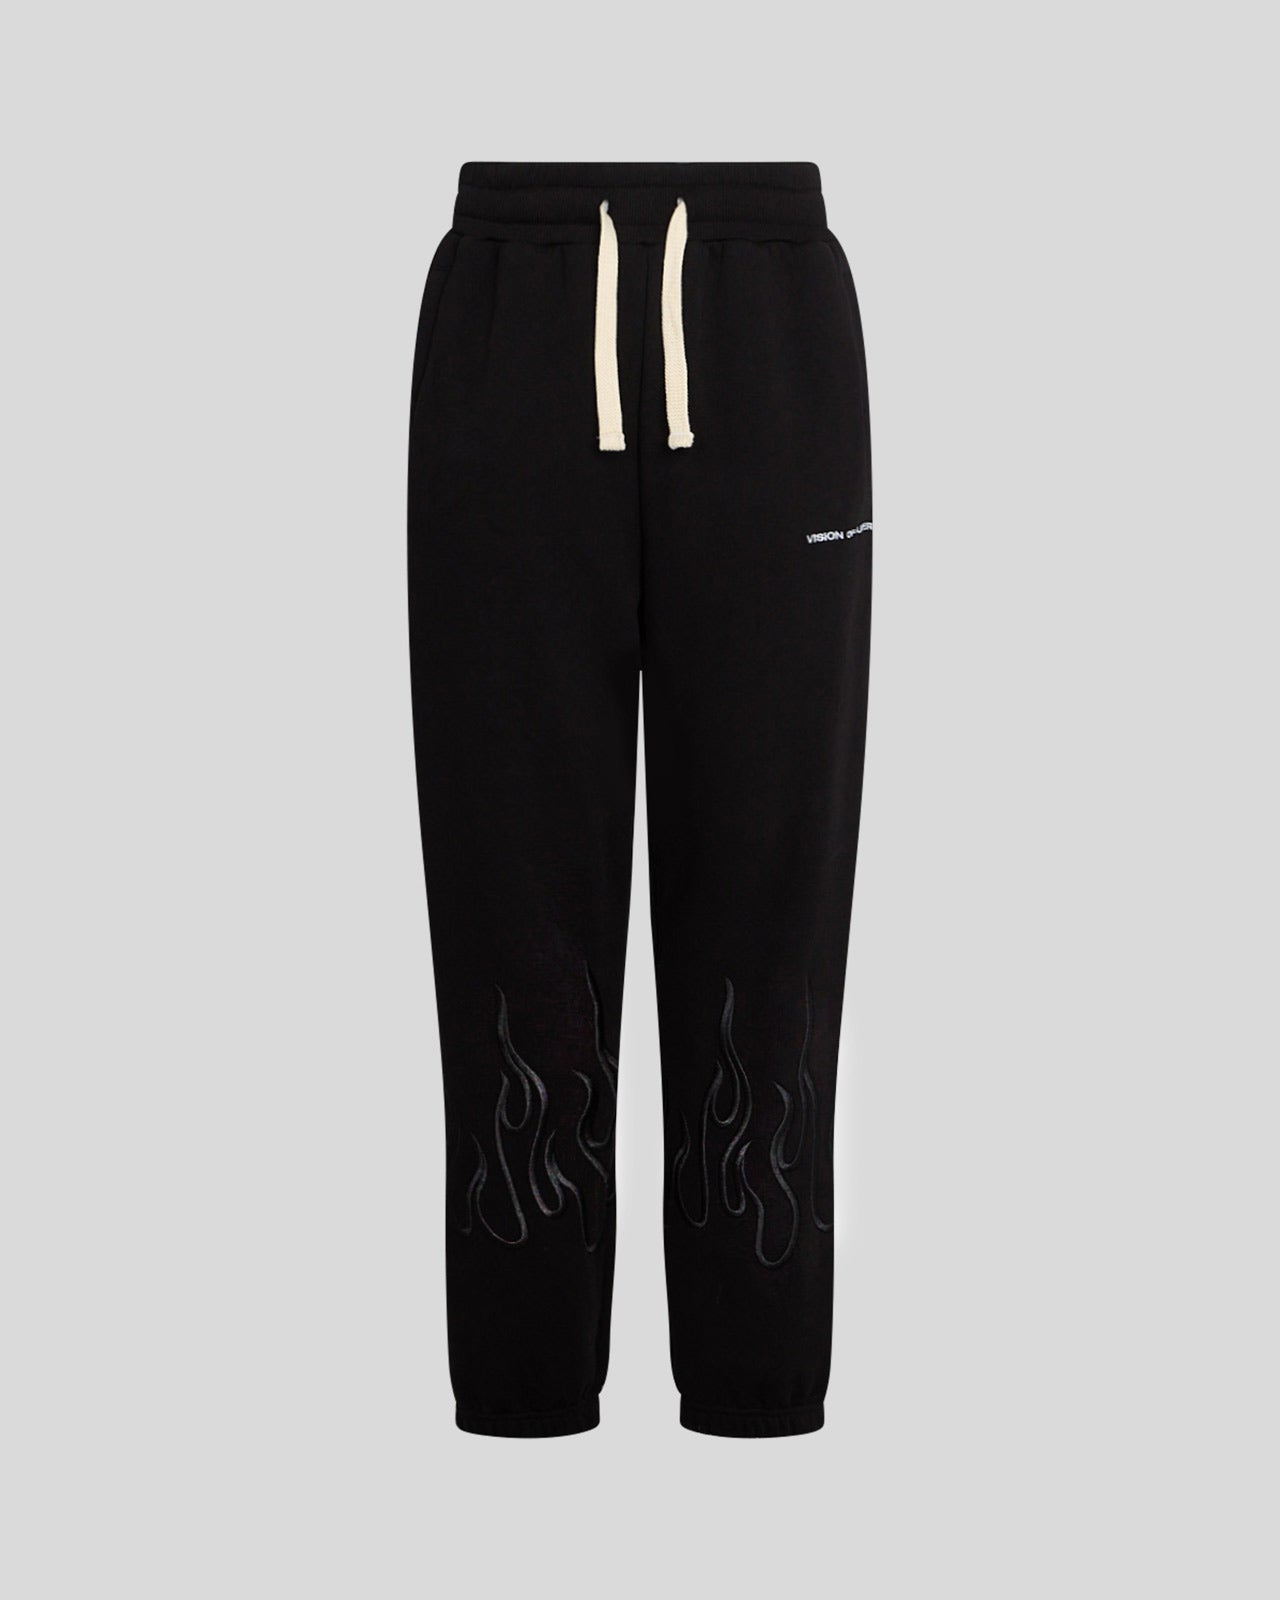 BLACK PANTS WITH BLACK EMBROIDERED FLAMES